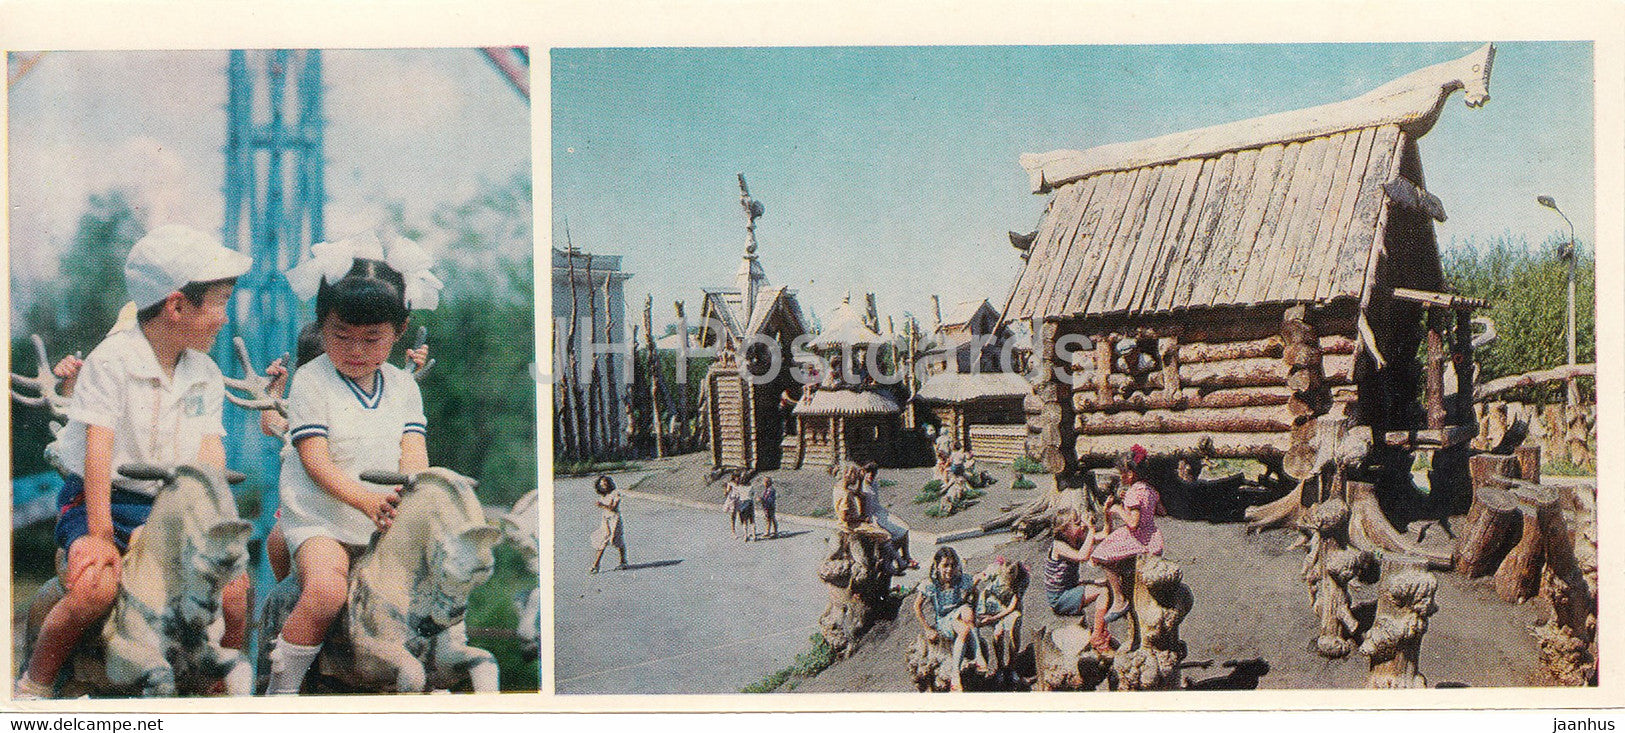 Kostanay - On the playgrounds of children's games and fairy tales - 1985 - Kazakhstan USSR - unused - JH Postcards